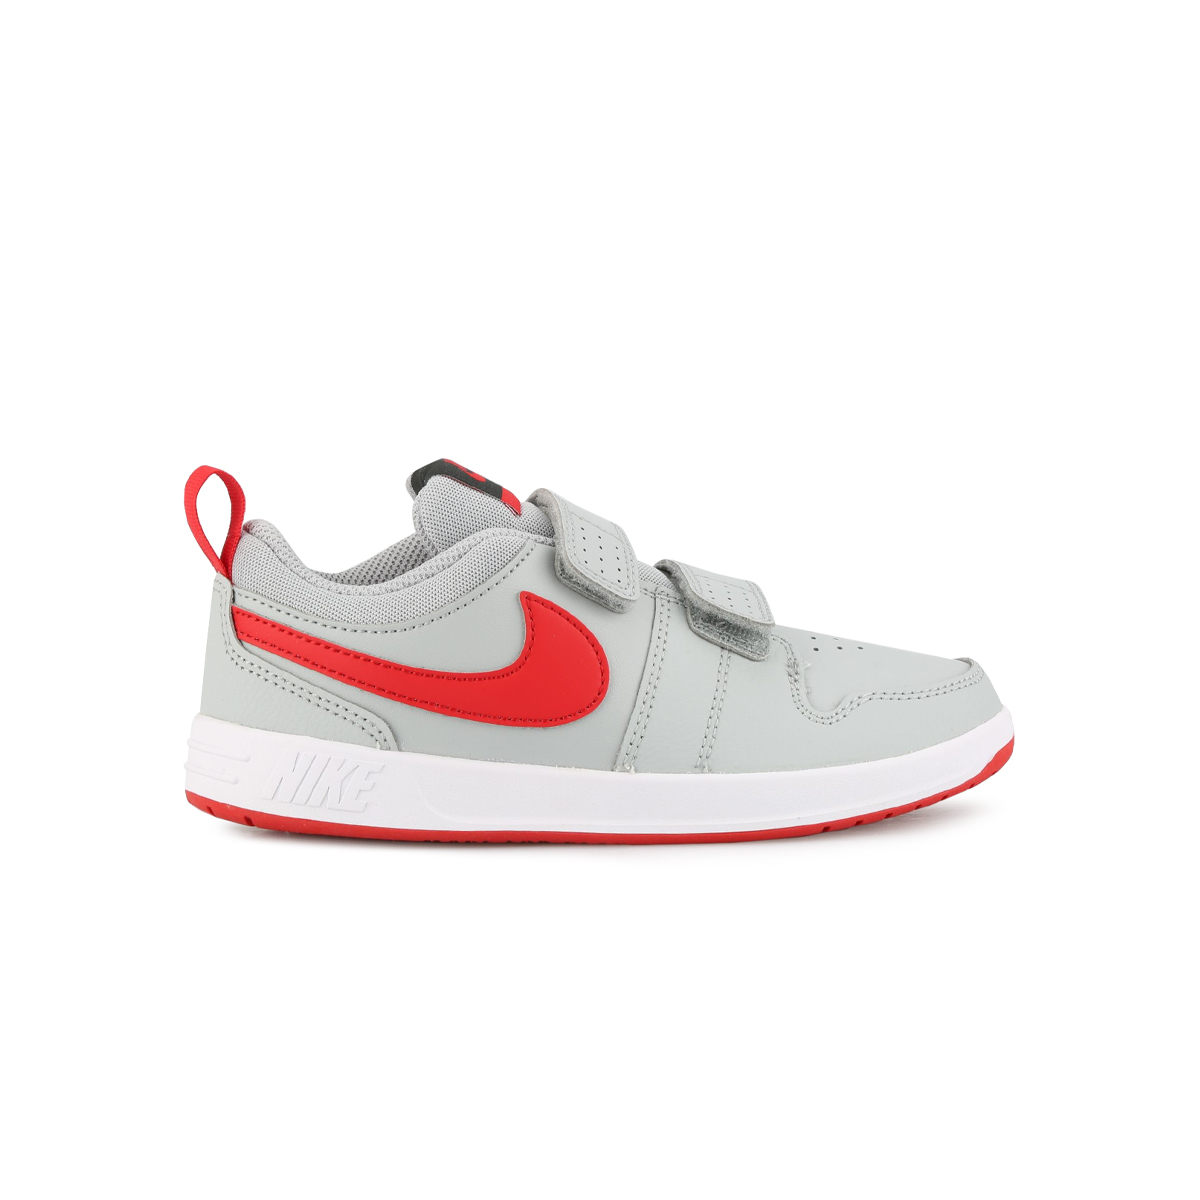 Zapatillas Nike Pico 5,  image number null